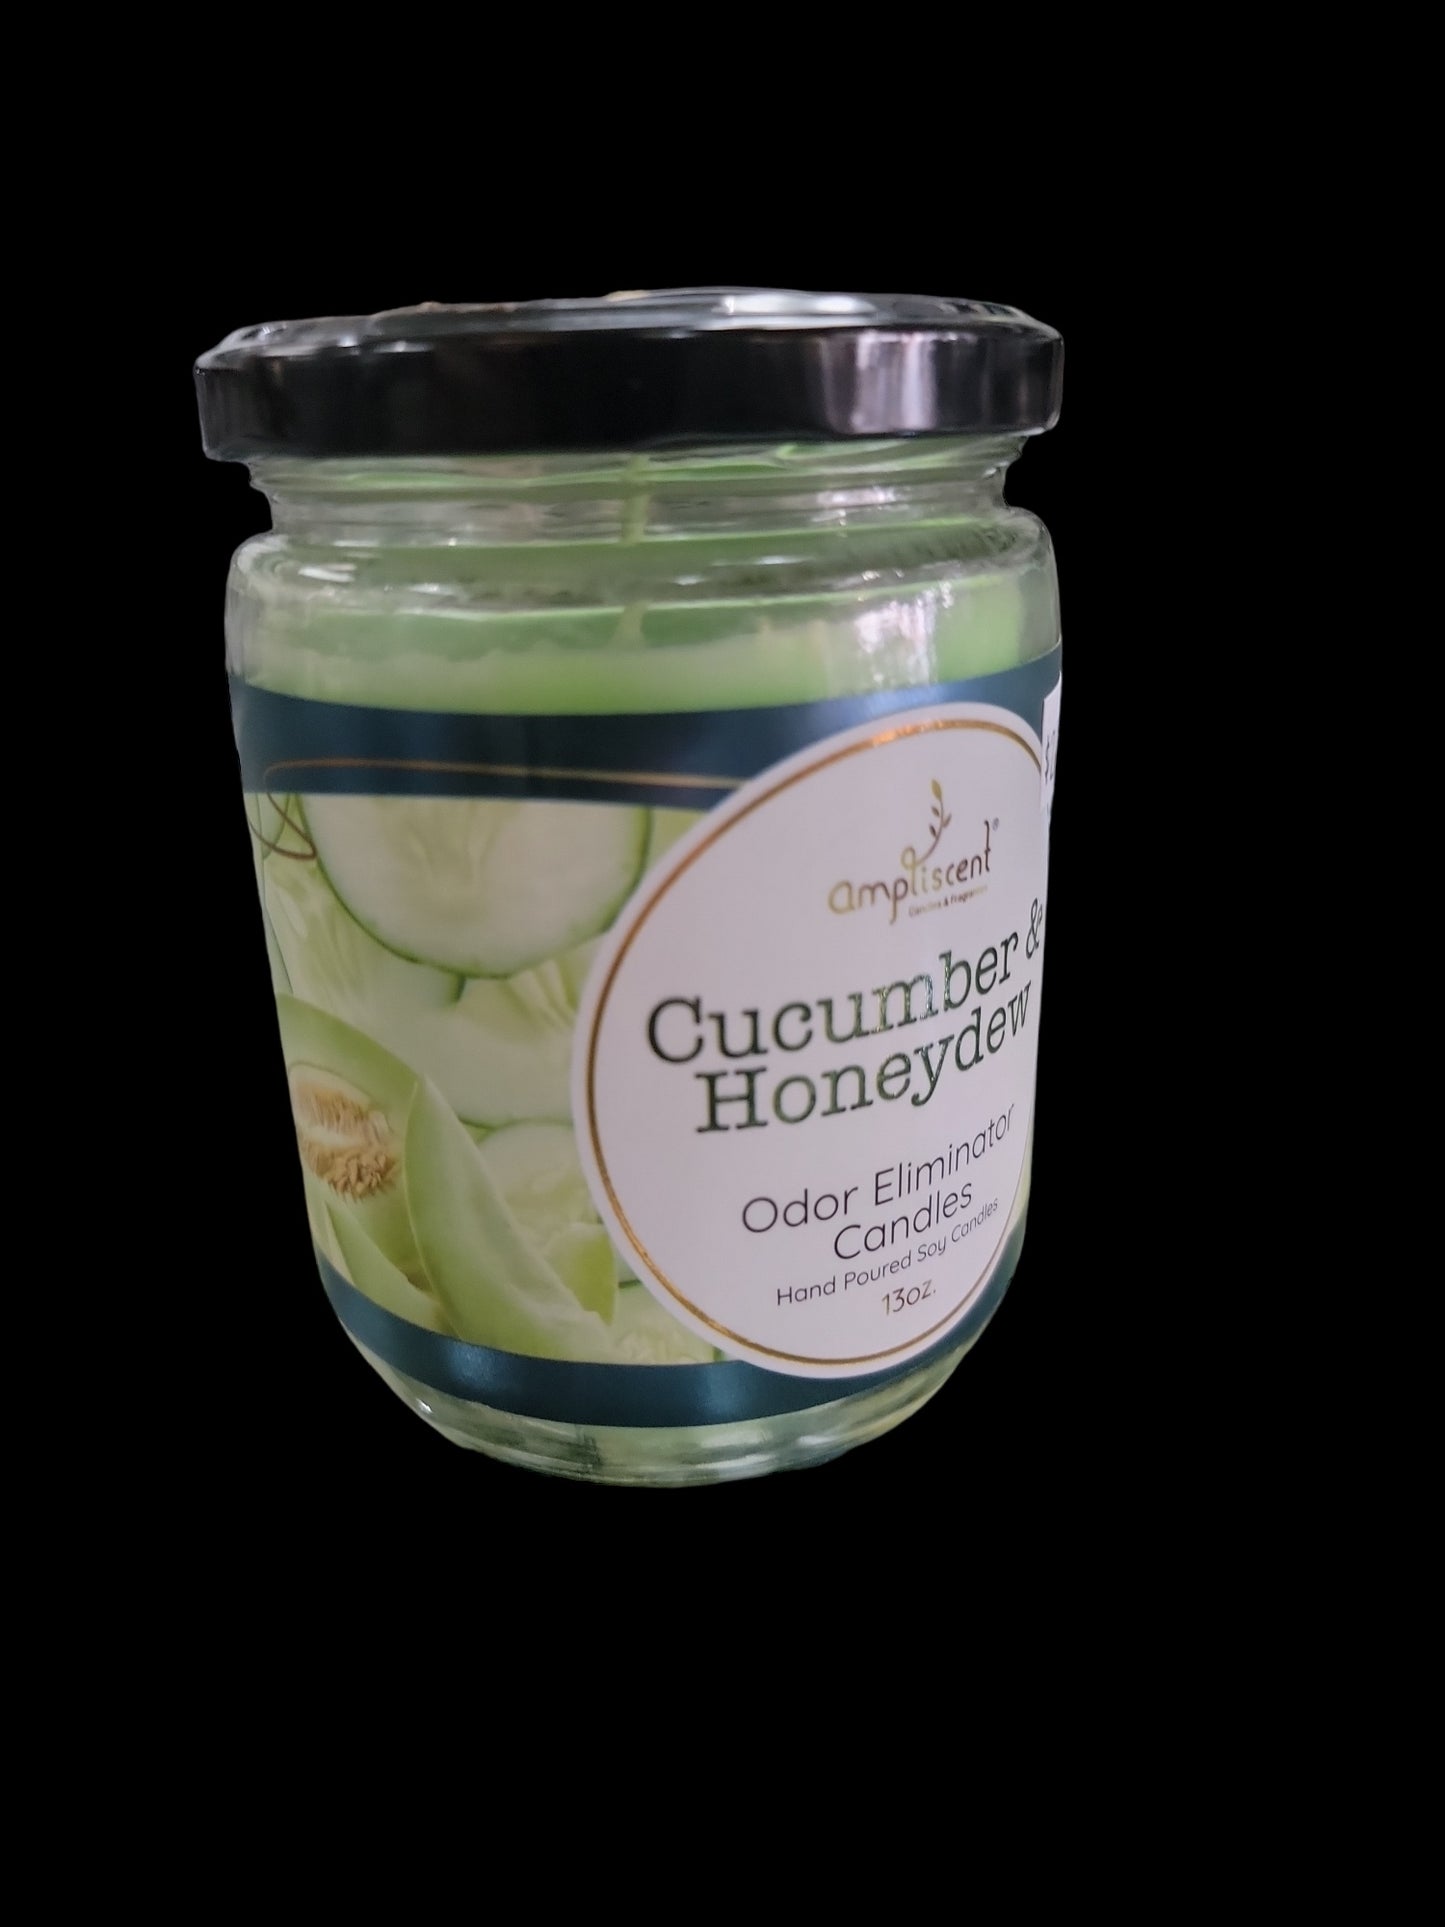 Cucumber and Honeydew Oder Eliminating Candle